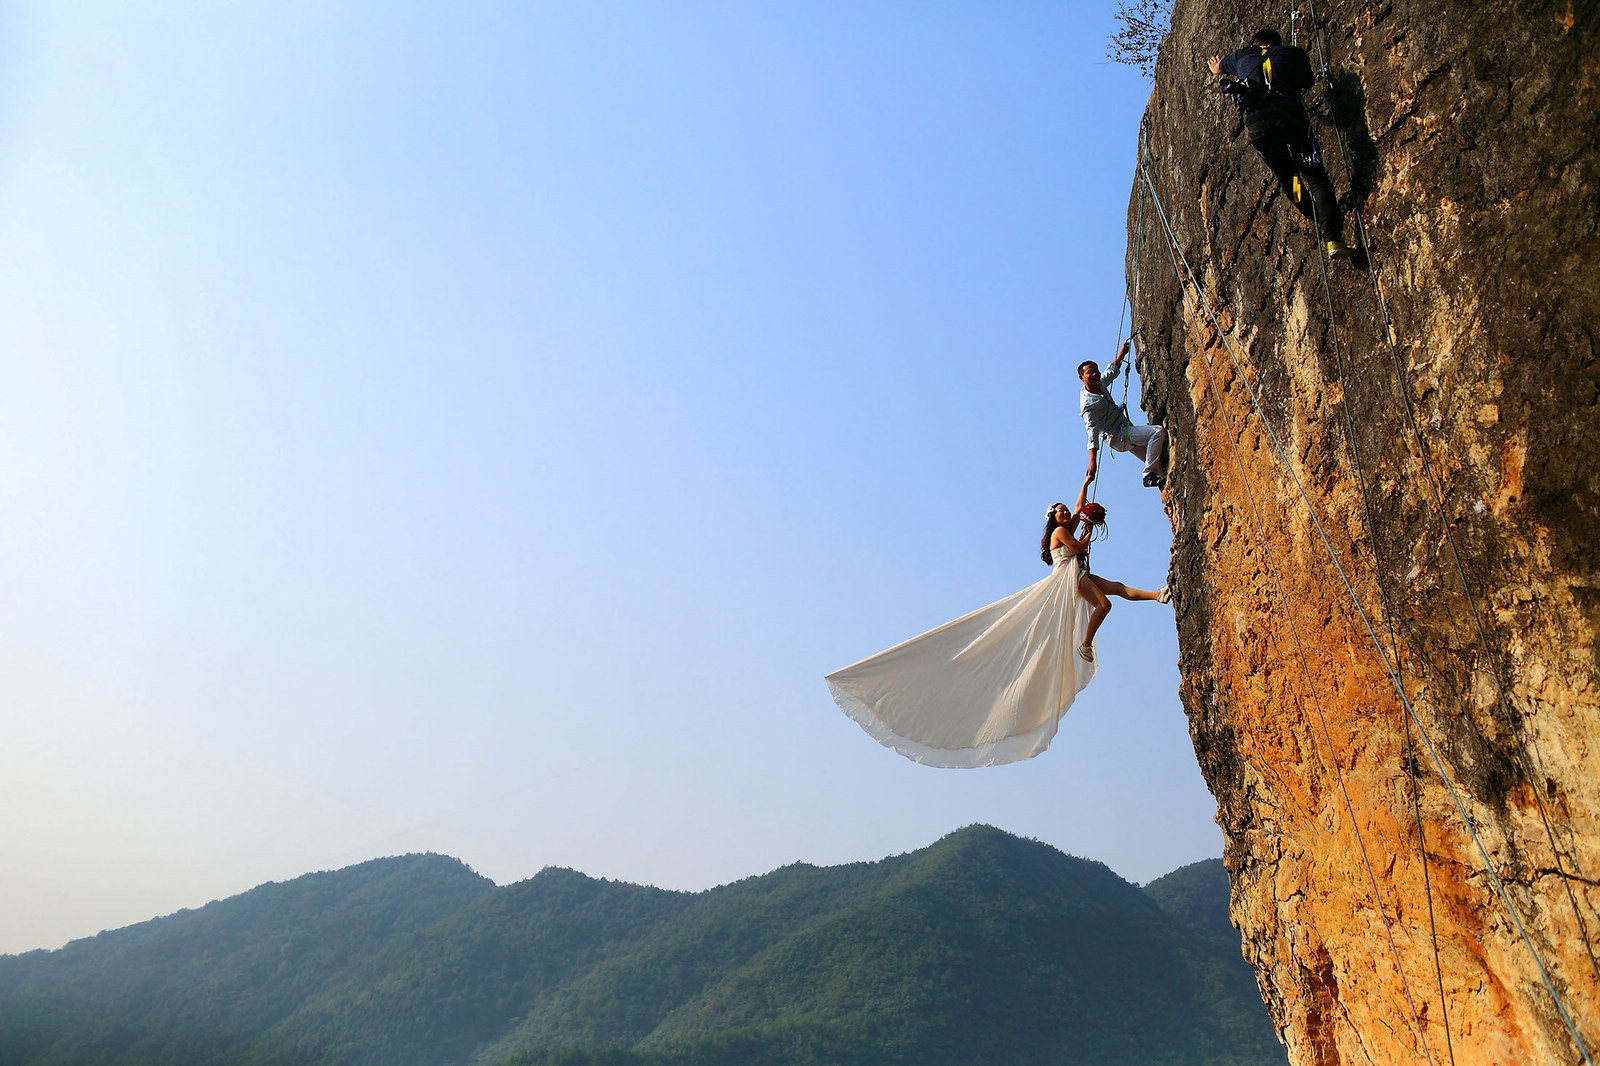 Zeng Feng takes wedding photos with his bride on a cliff in Jinhua, China.